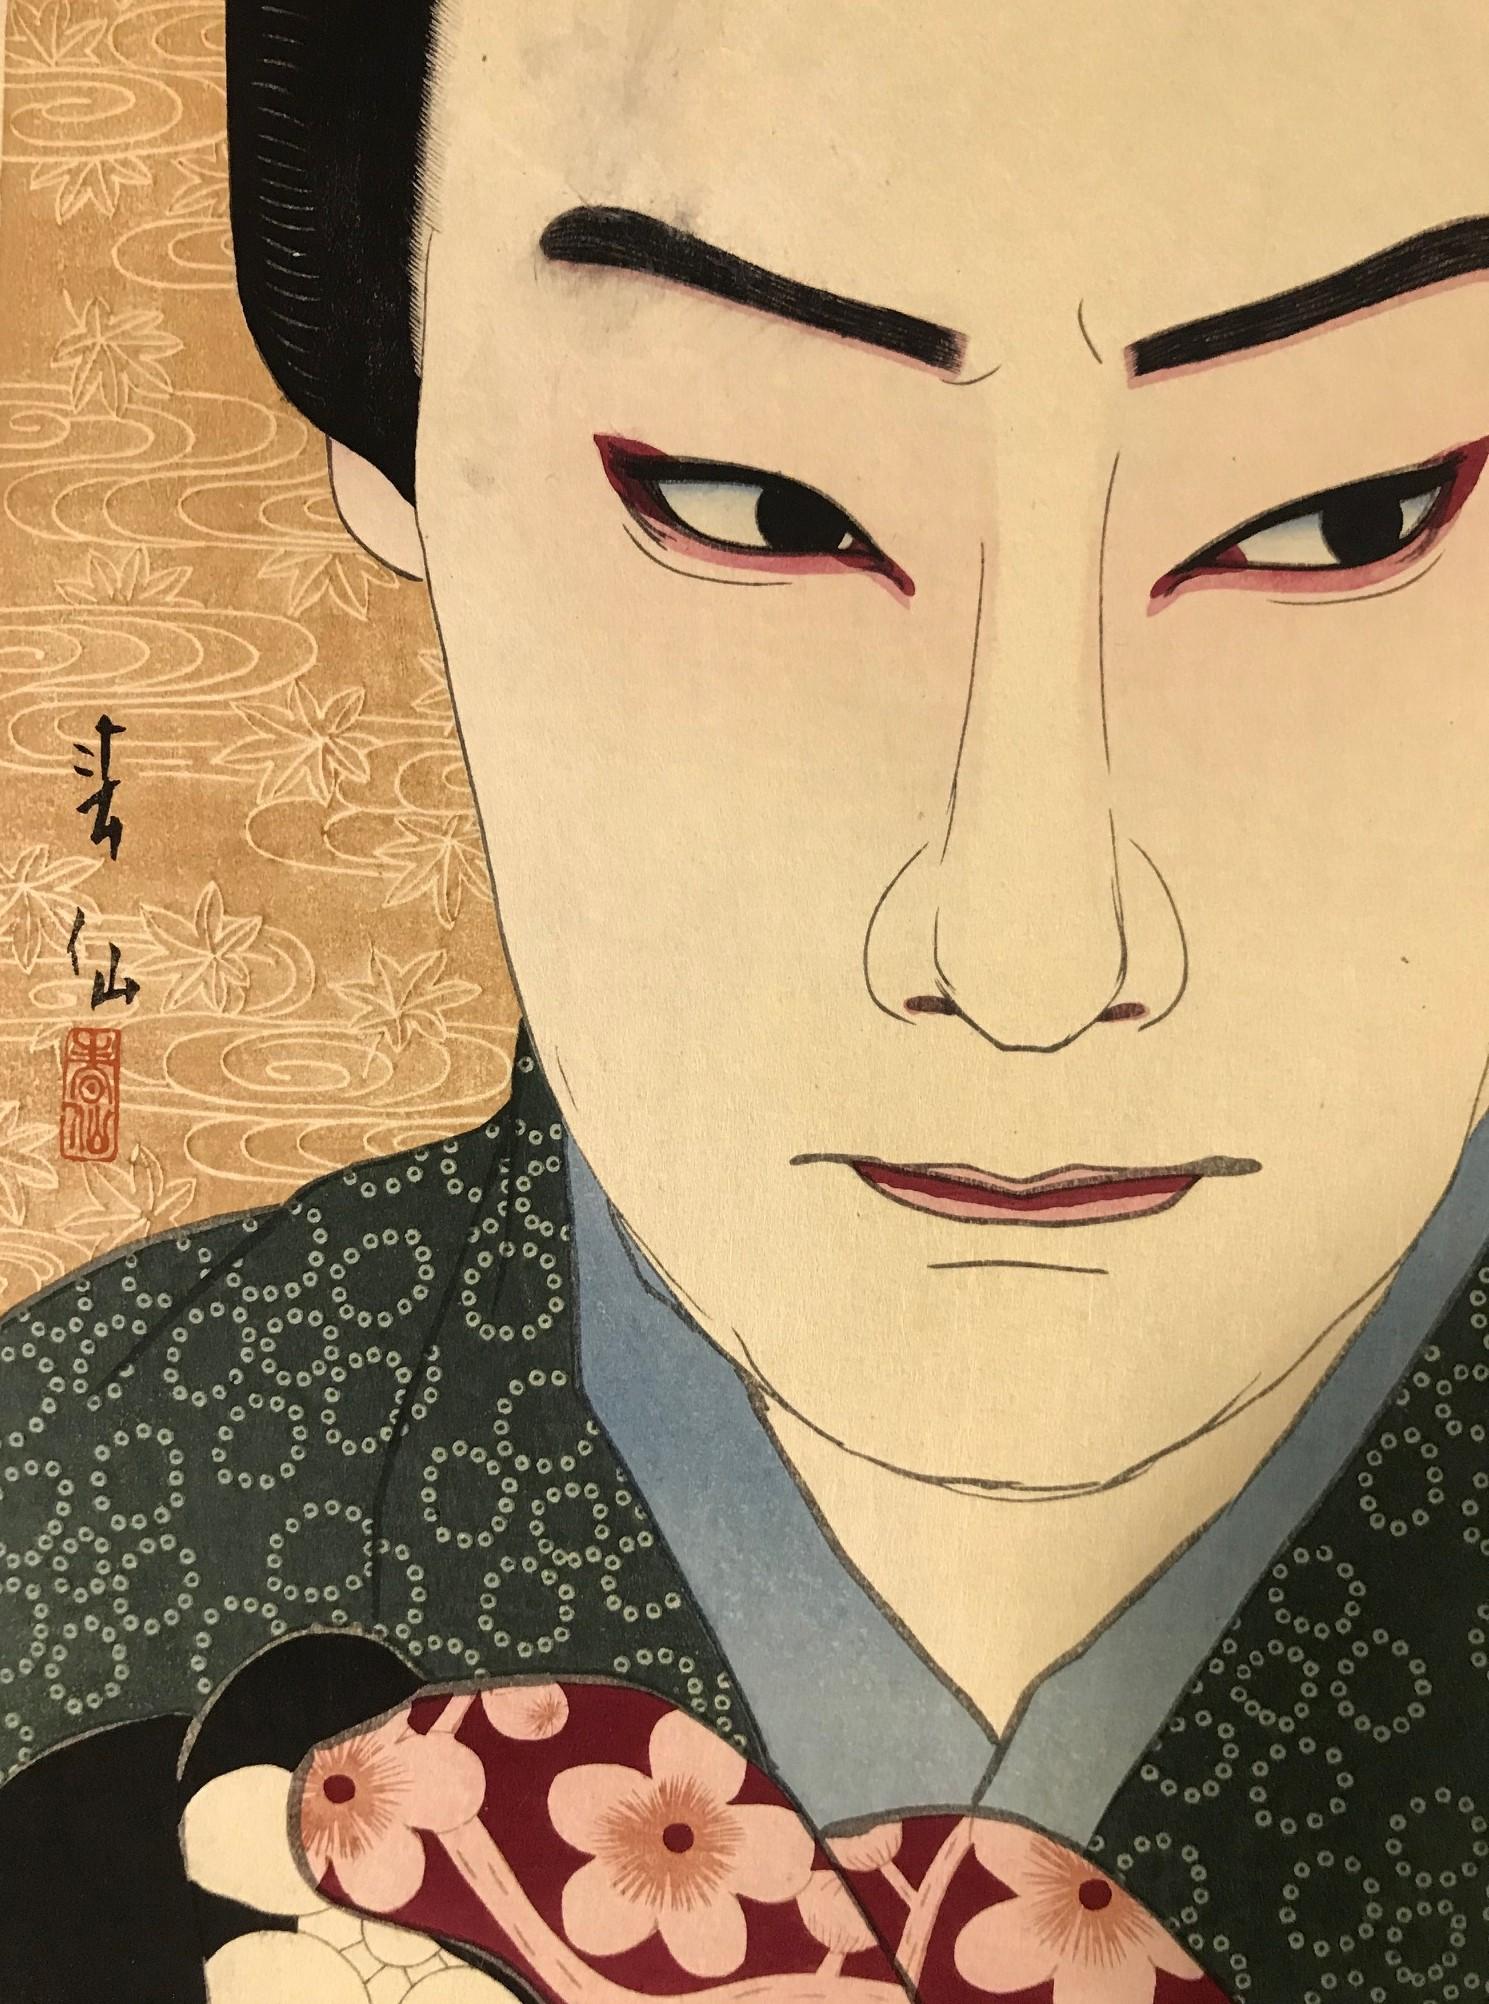 A wonderful woodblock print by famed Japanese artists Natori Shunsen of well known Japanese actor Nakamura Ganjiro in his role as Sakata Tojuro from Natori's series Thirty-Six Portraits of Actors. In 1925, Natori and his publisher, Watanabe, worked